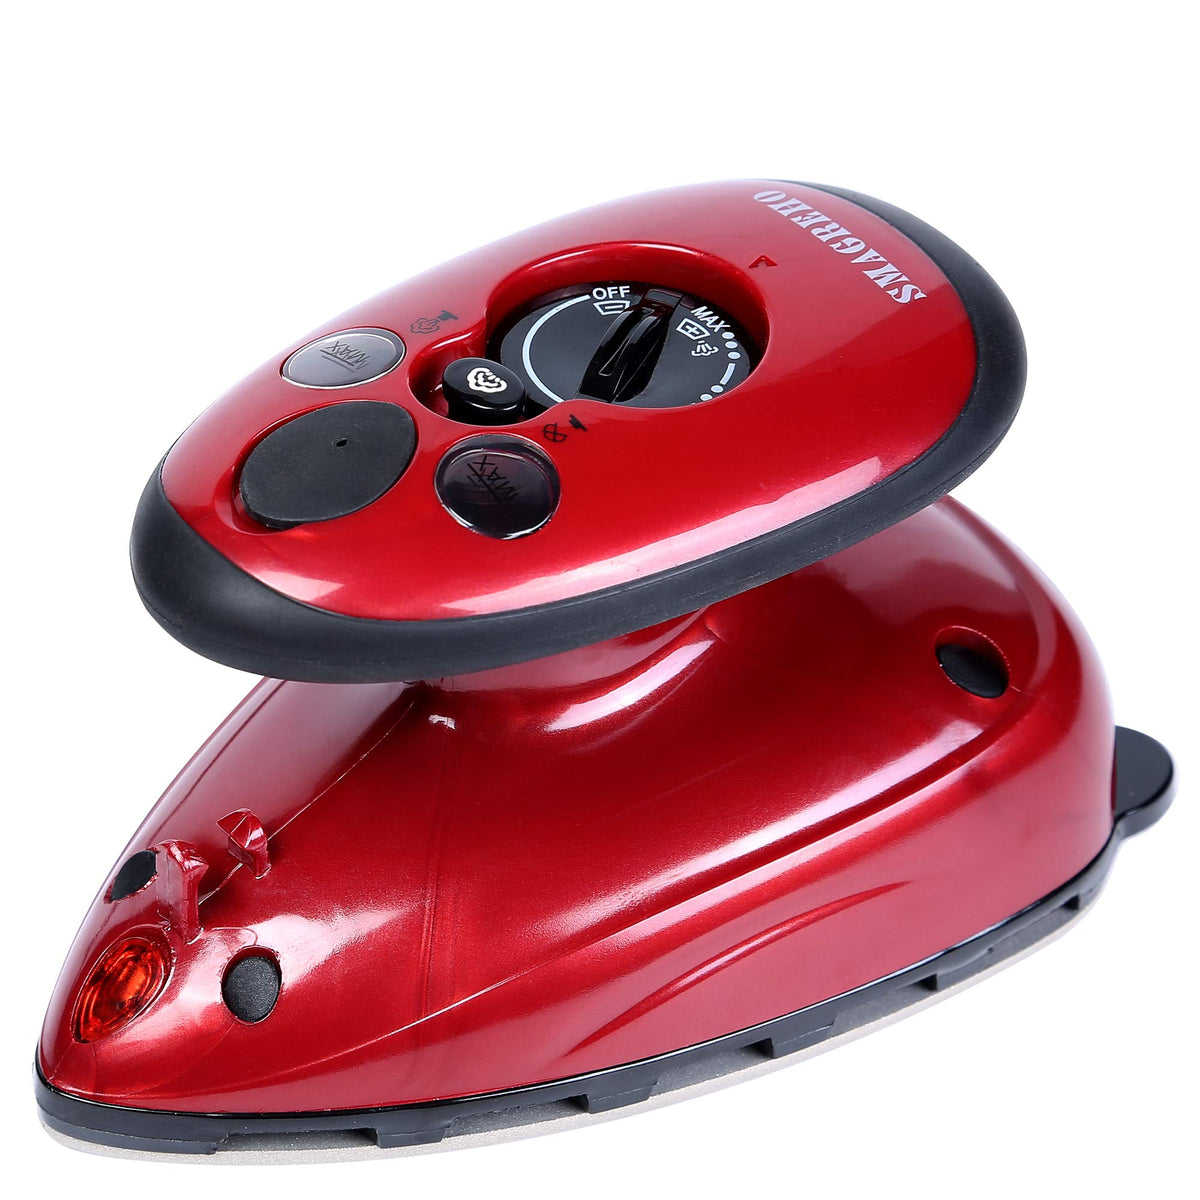 THE Mini Travel IRON by SIE Products TK-501L Dual Voltage 120/240 - Red